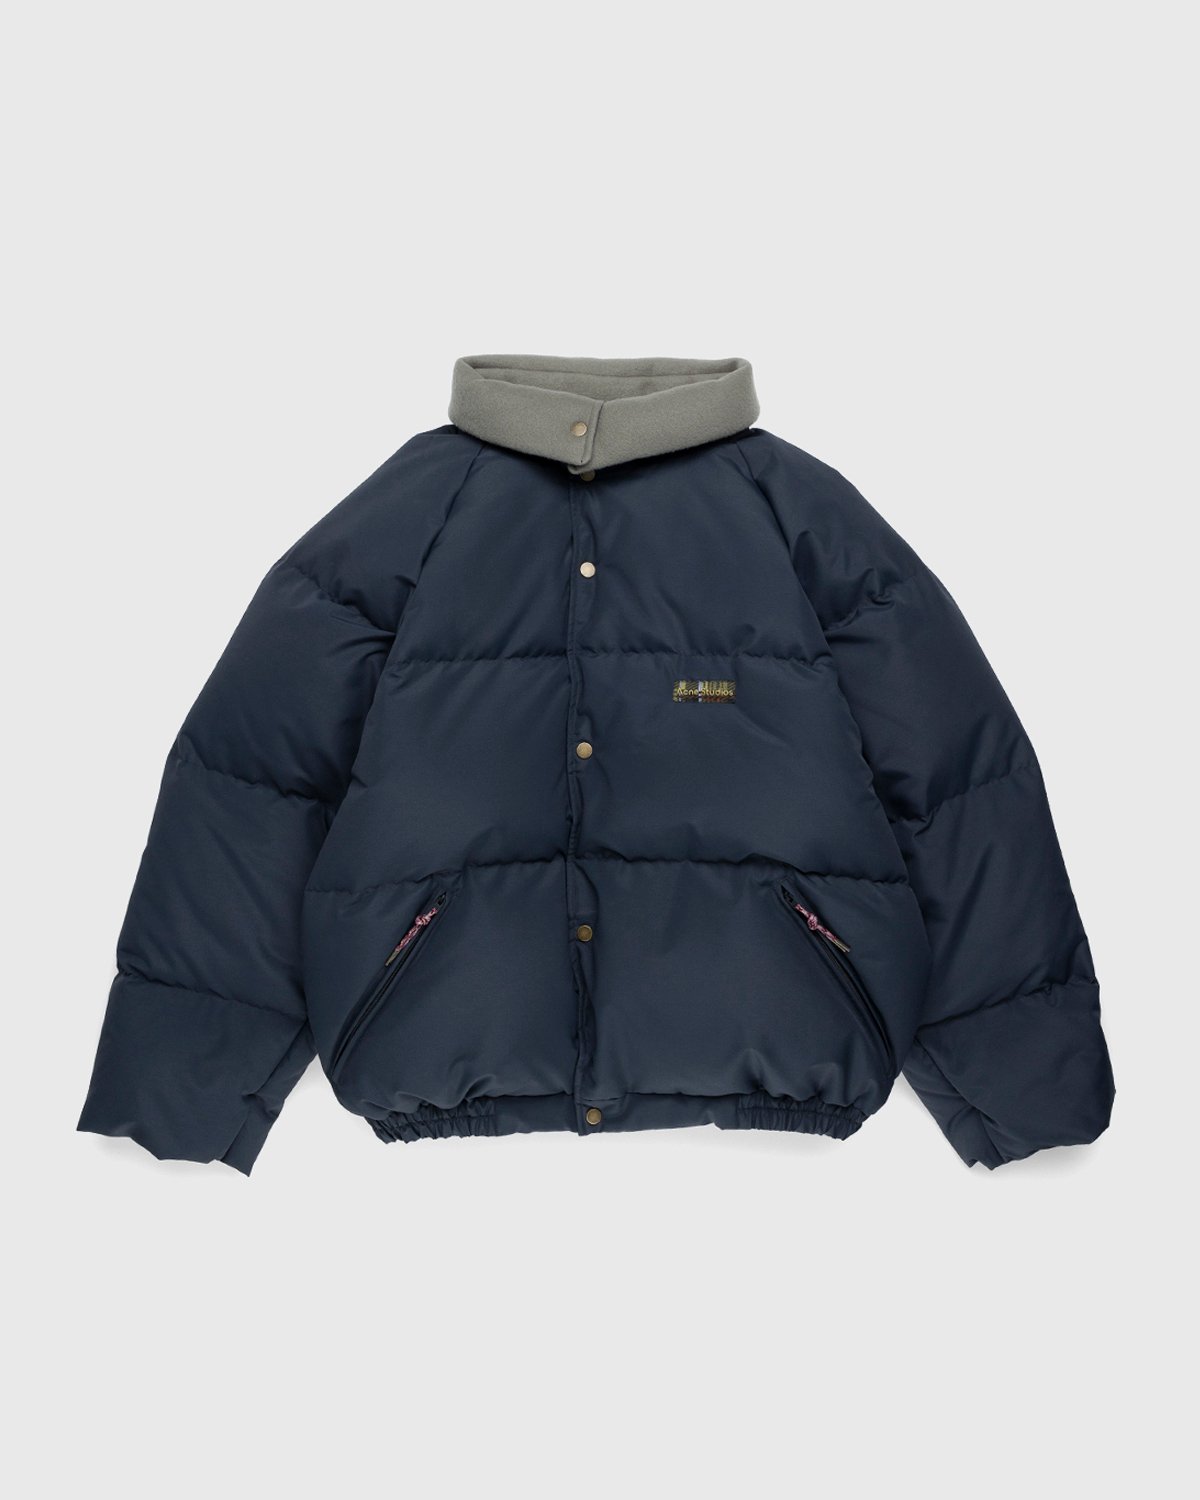 Acne Studios - Down Puffer Jacket Charcoal Grey - Clothing - Grey - Image 2